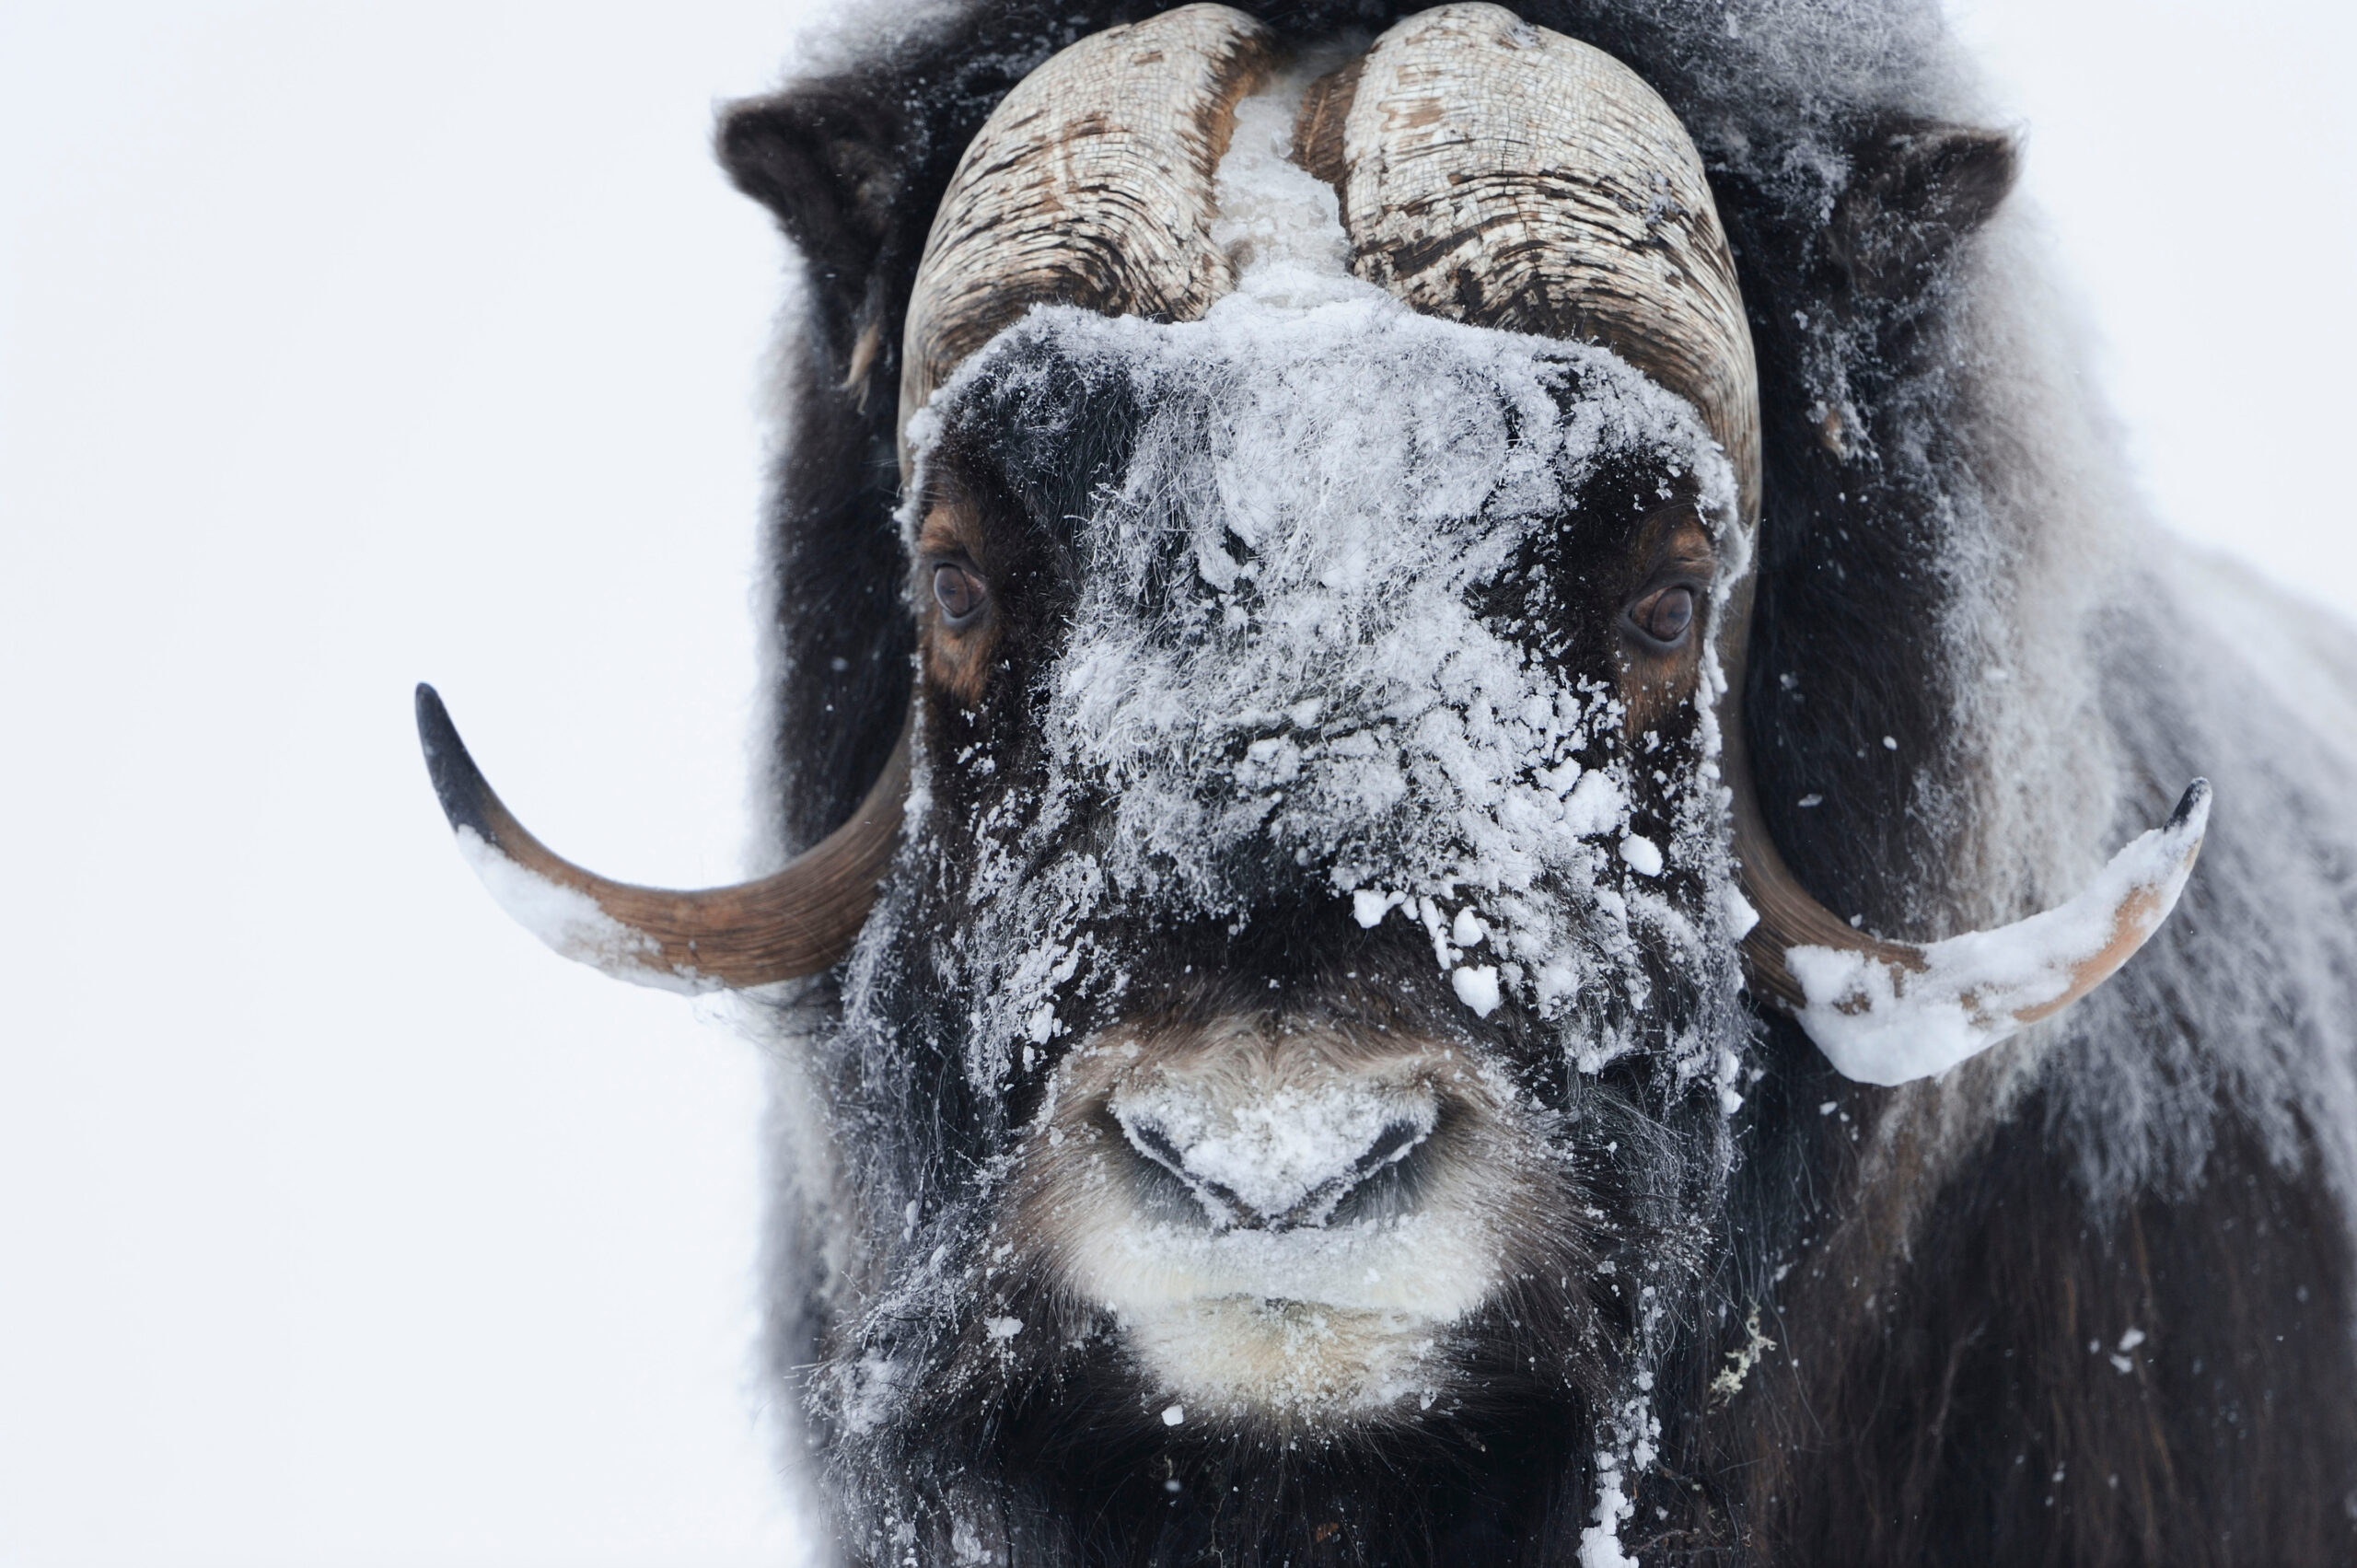 A close up of a muskox with snow on its face.